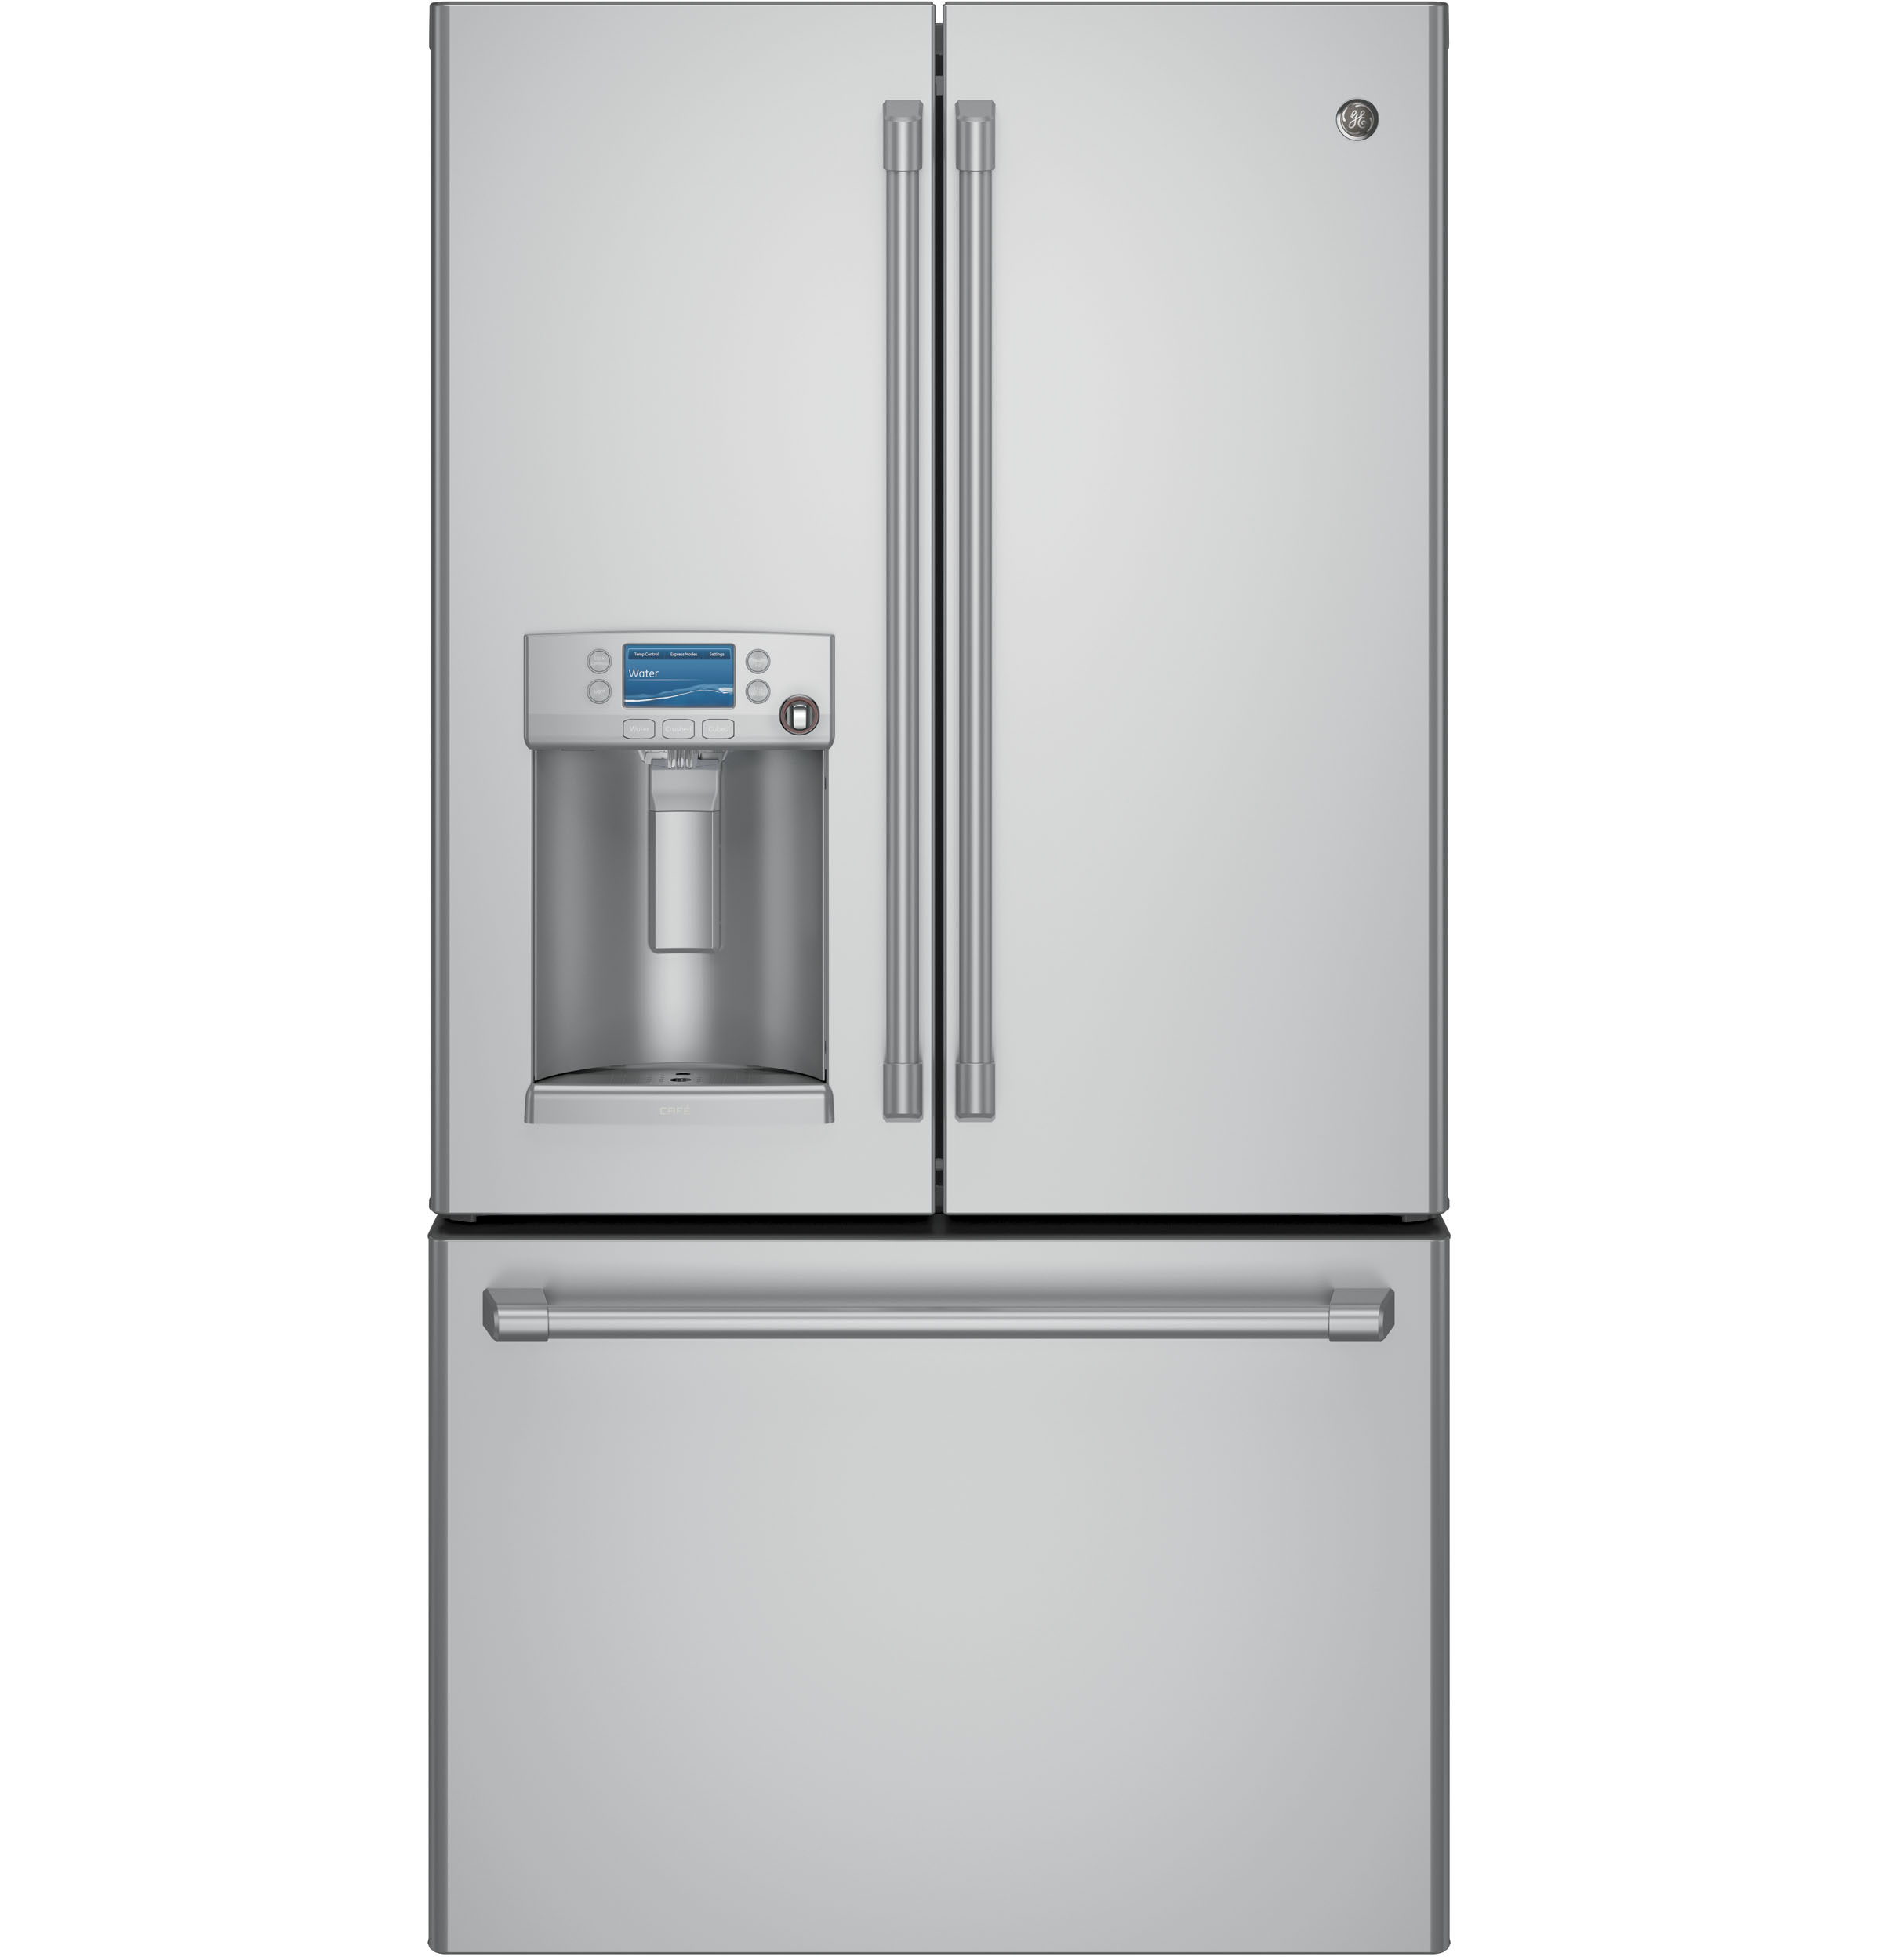 GE Café™ Series ENERGY STAR® 22.2 Cu. Ft. Counter-Depth French-Door Refrigerator with Hot Water Dispenser